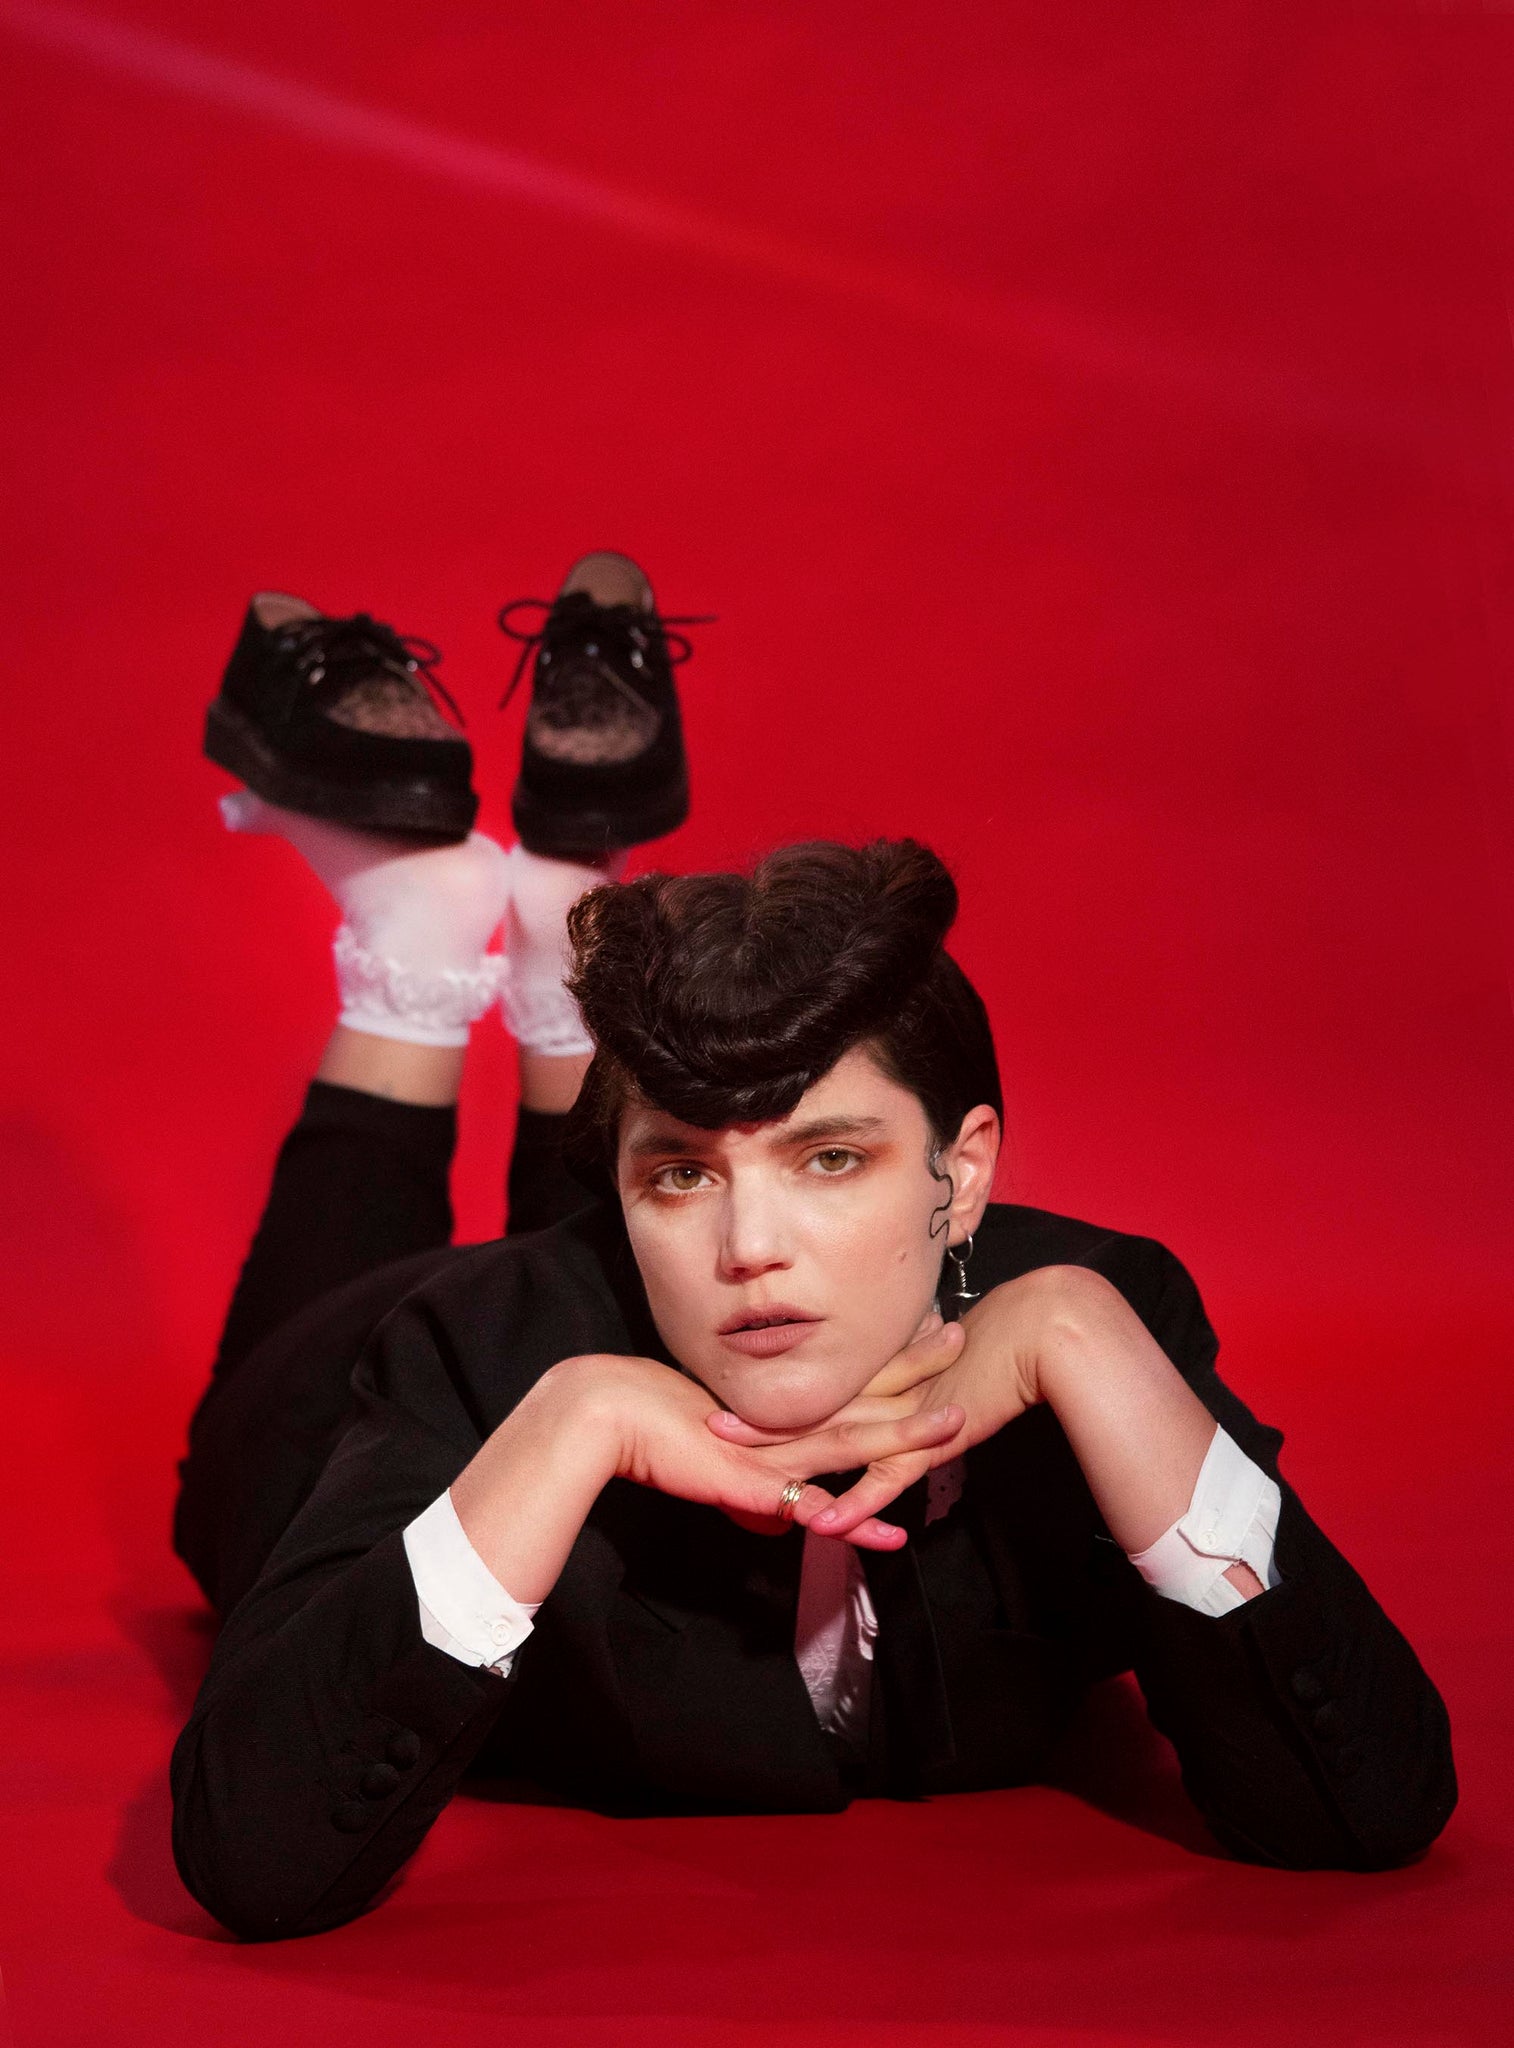 Soko, Teddy Boy. Hair and Makeup by Leticia Llesmin